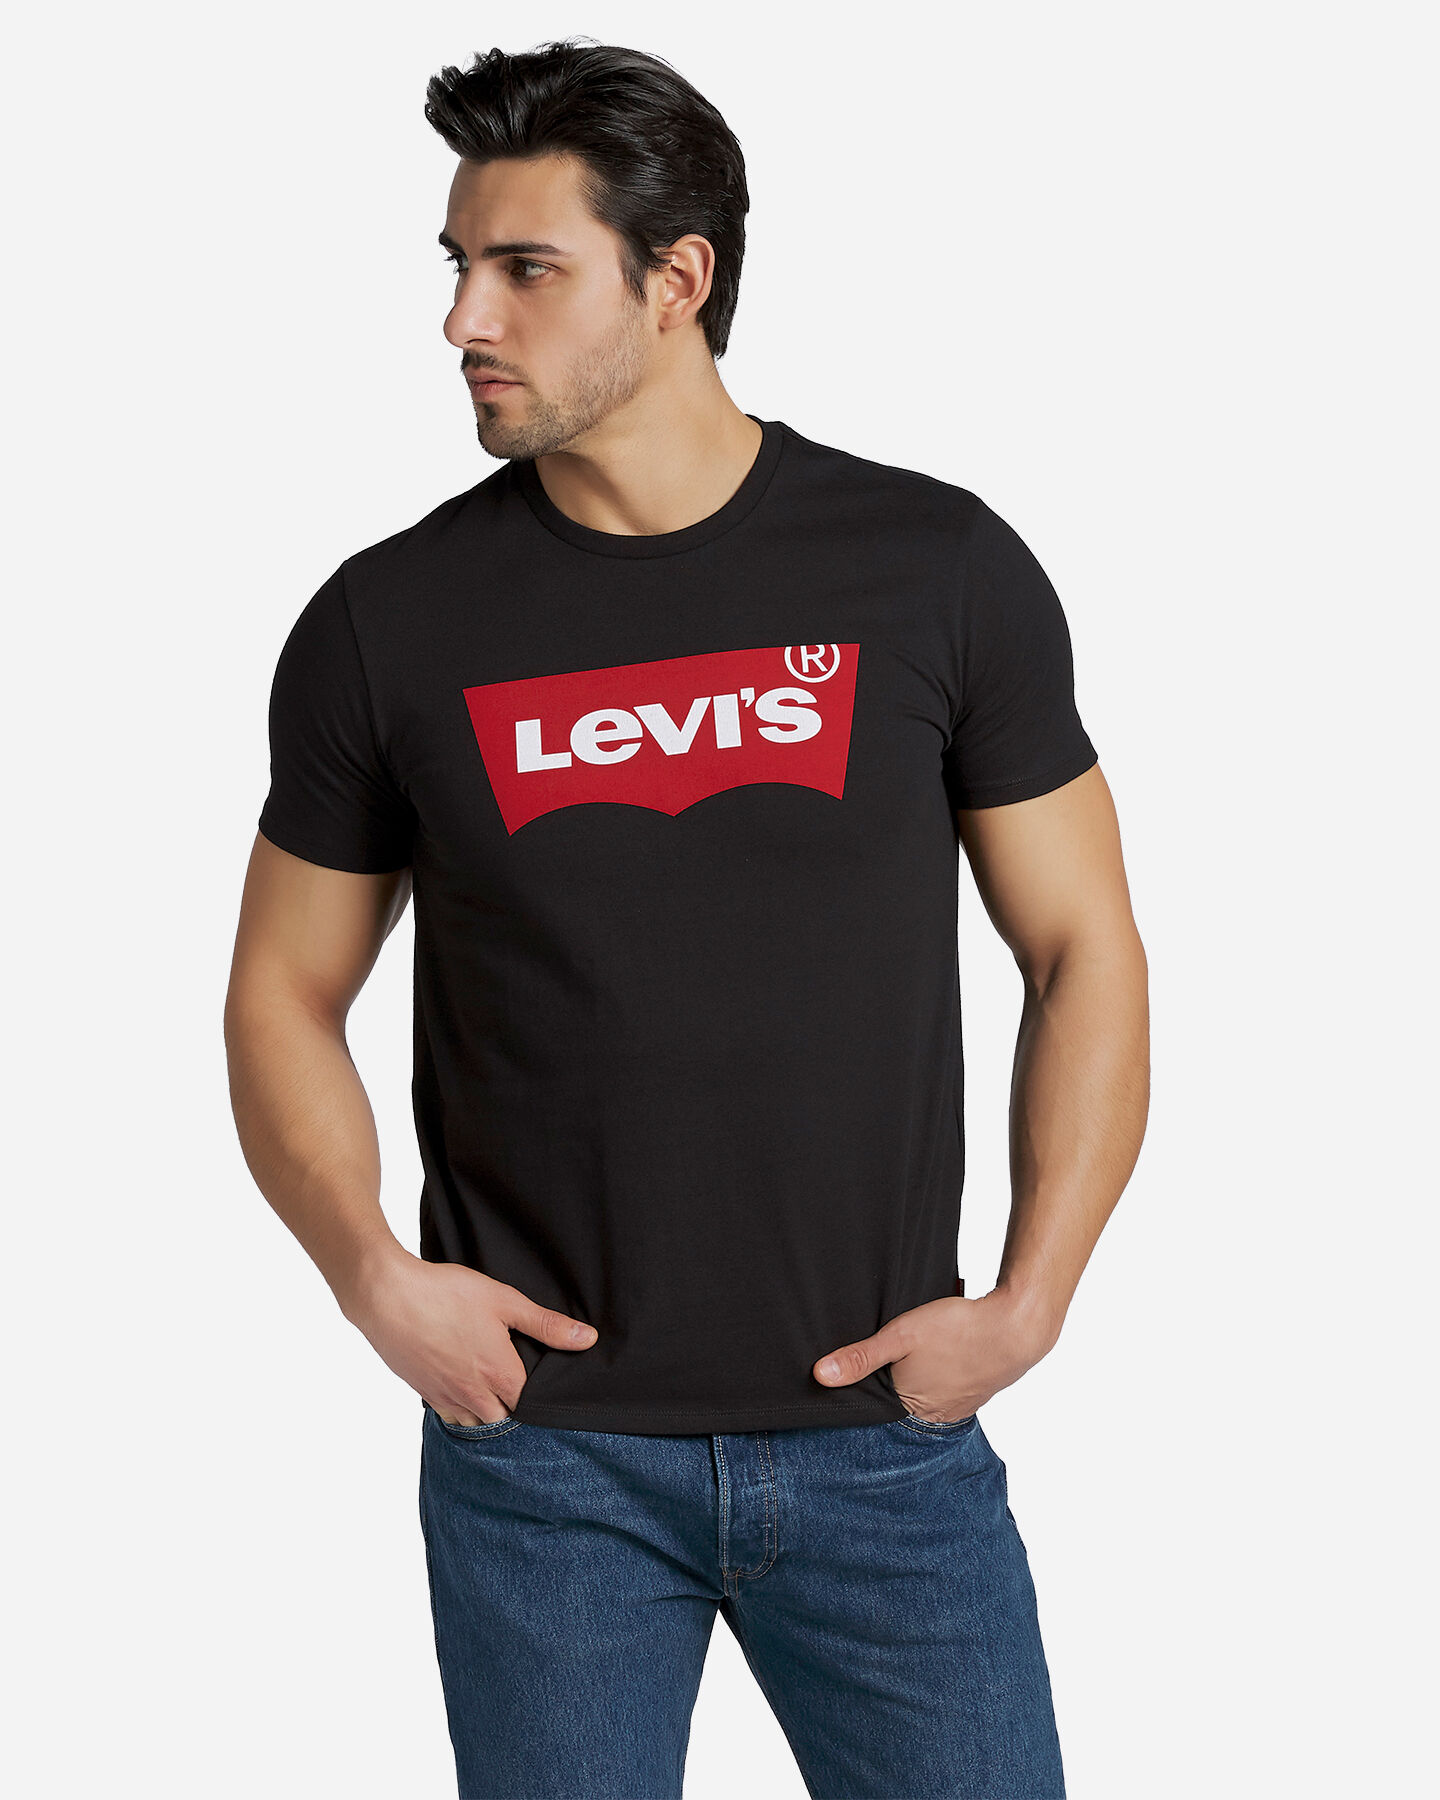  T-Shirt LEVI'S HOUSEMARK M S4063626|0137|XS scatto 0